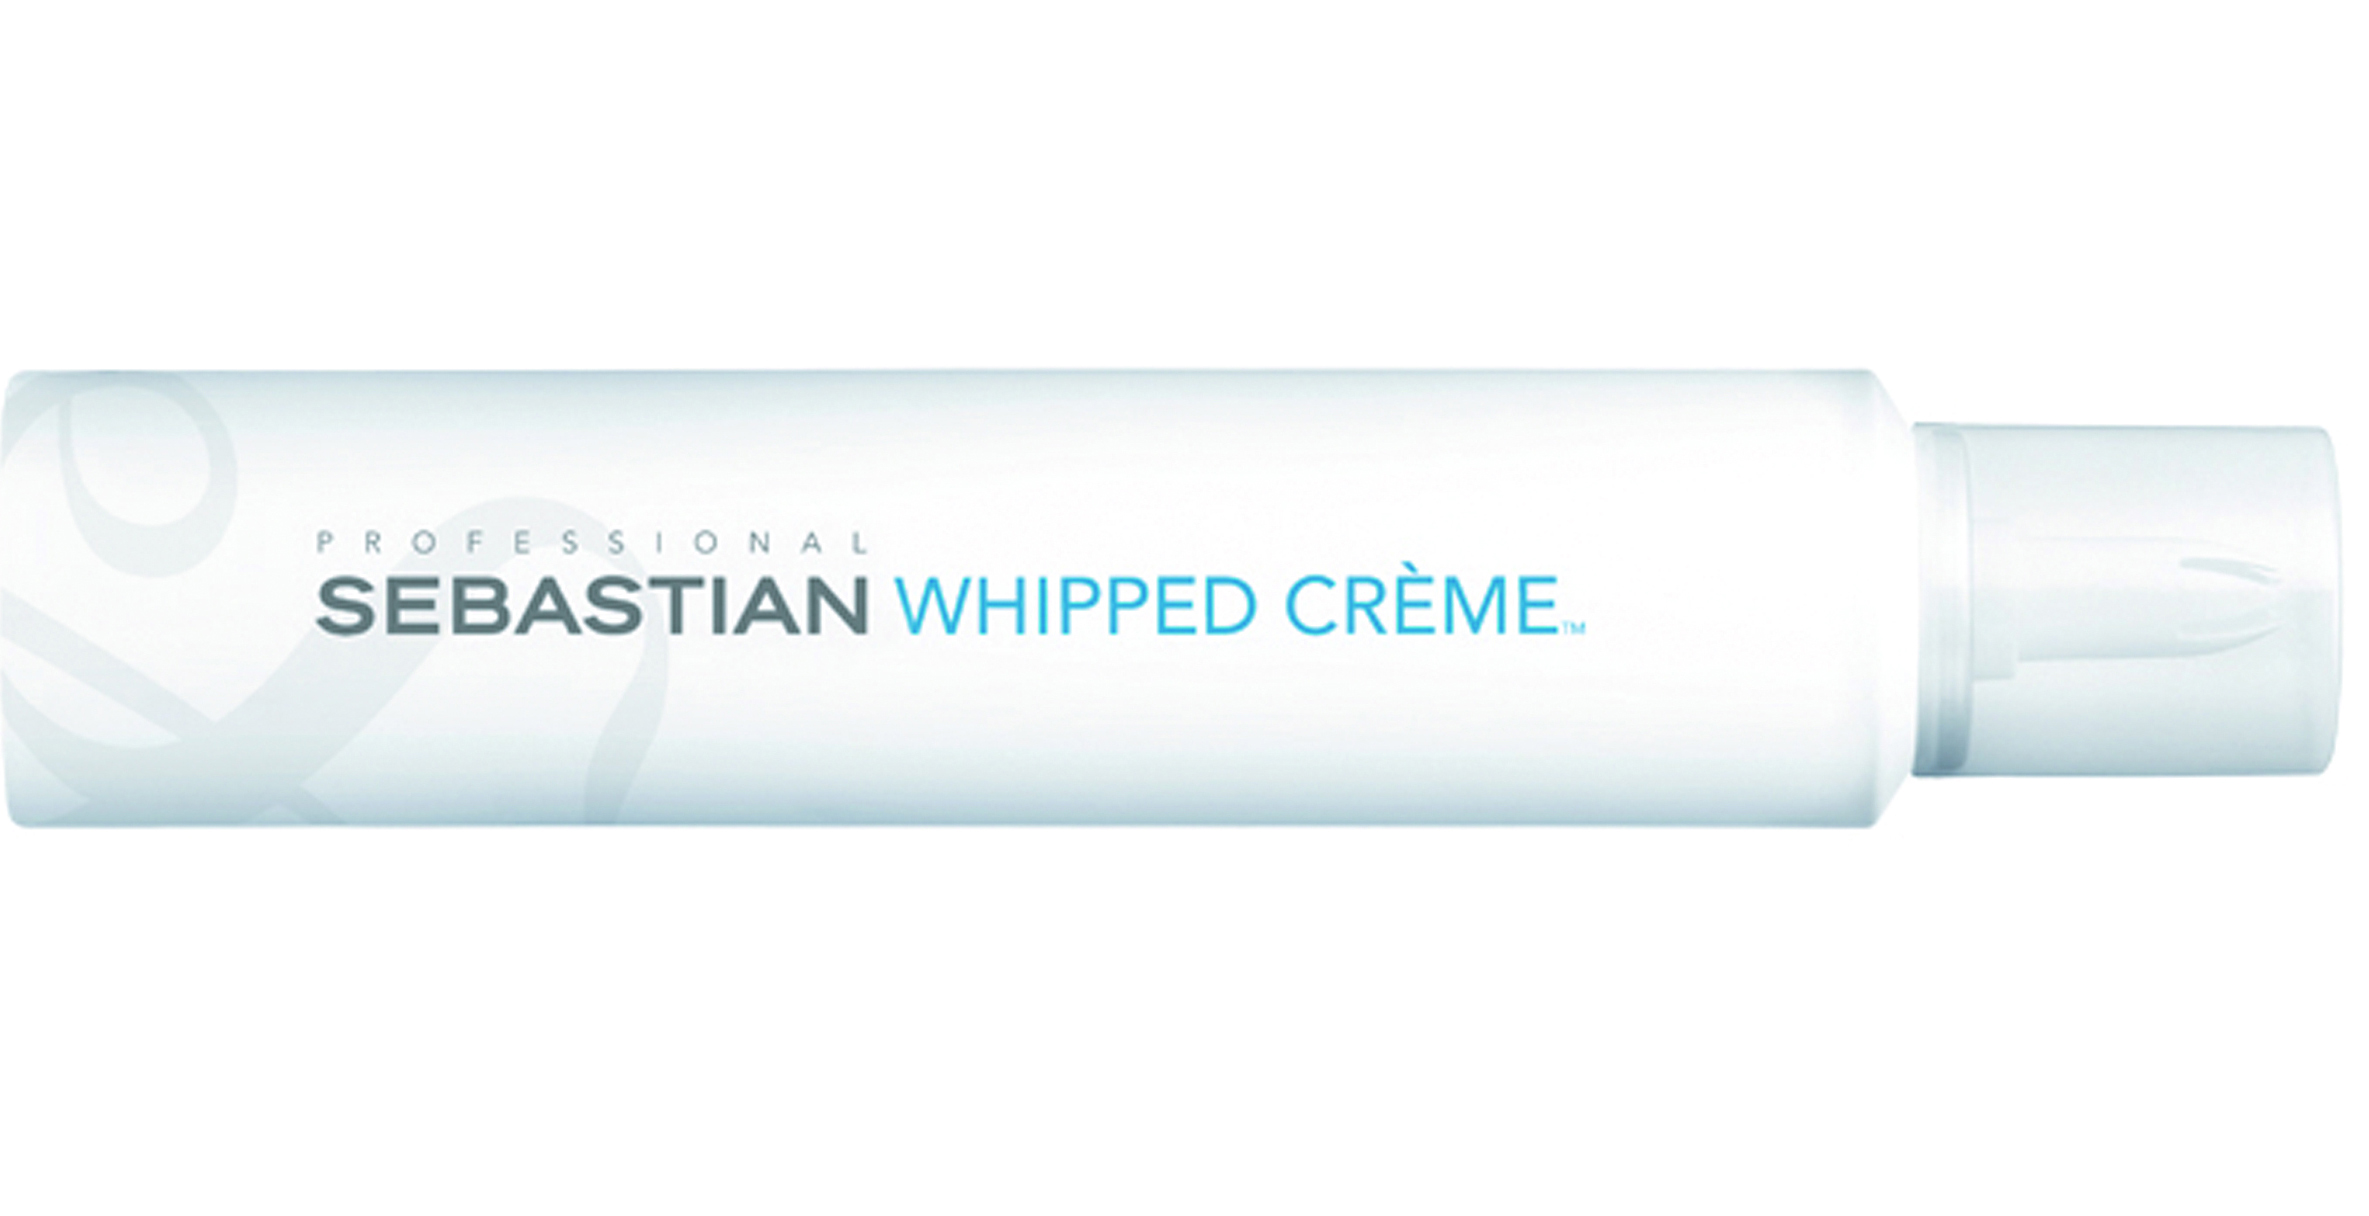 Whipped_Creme2